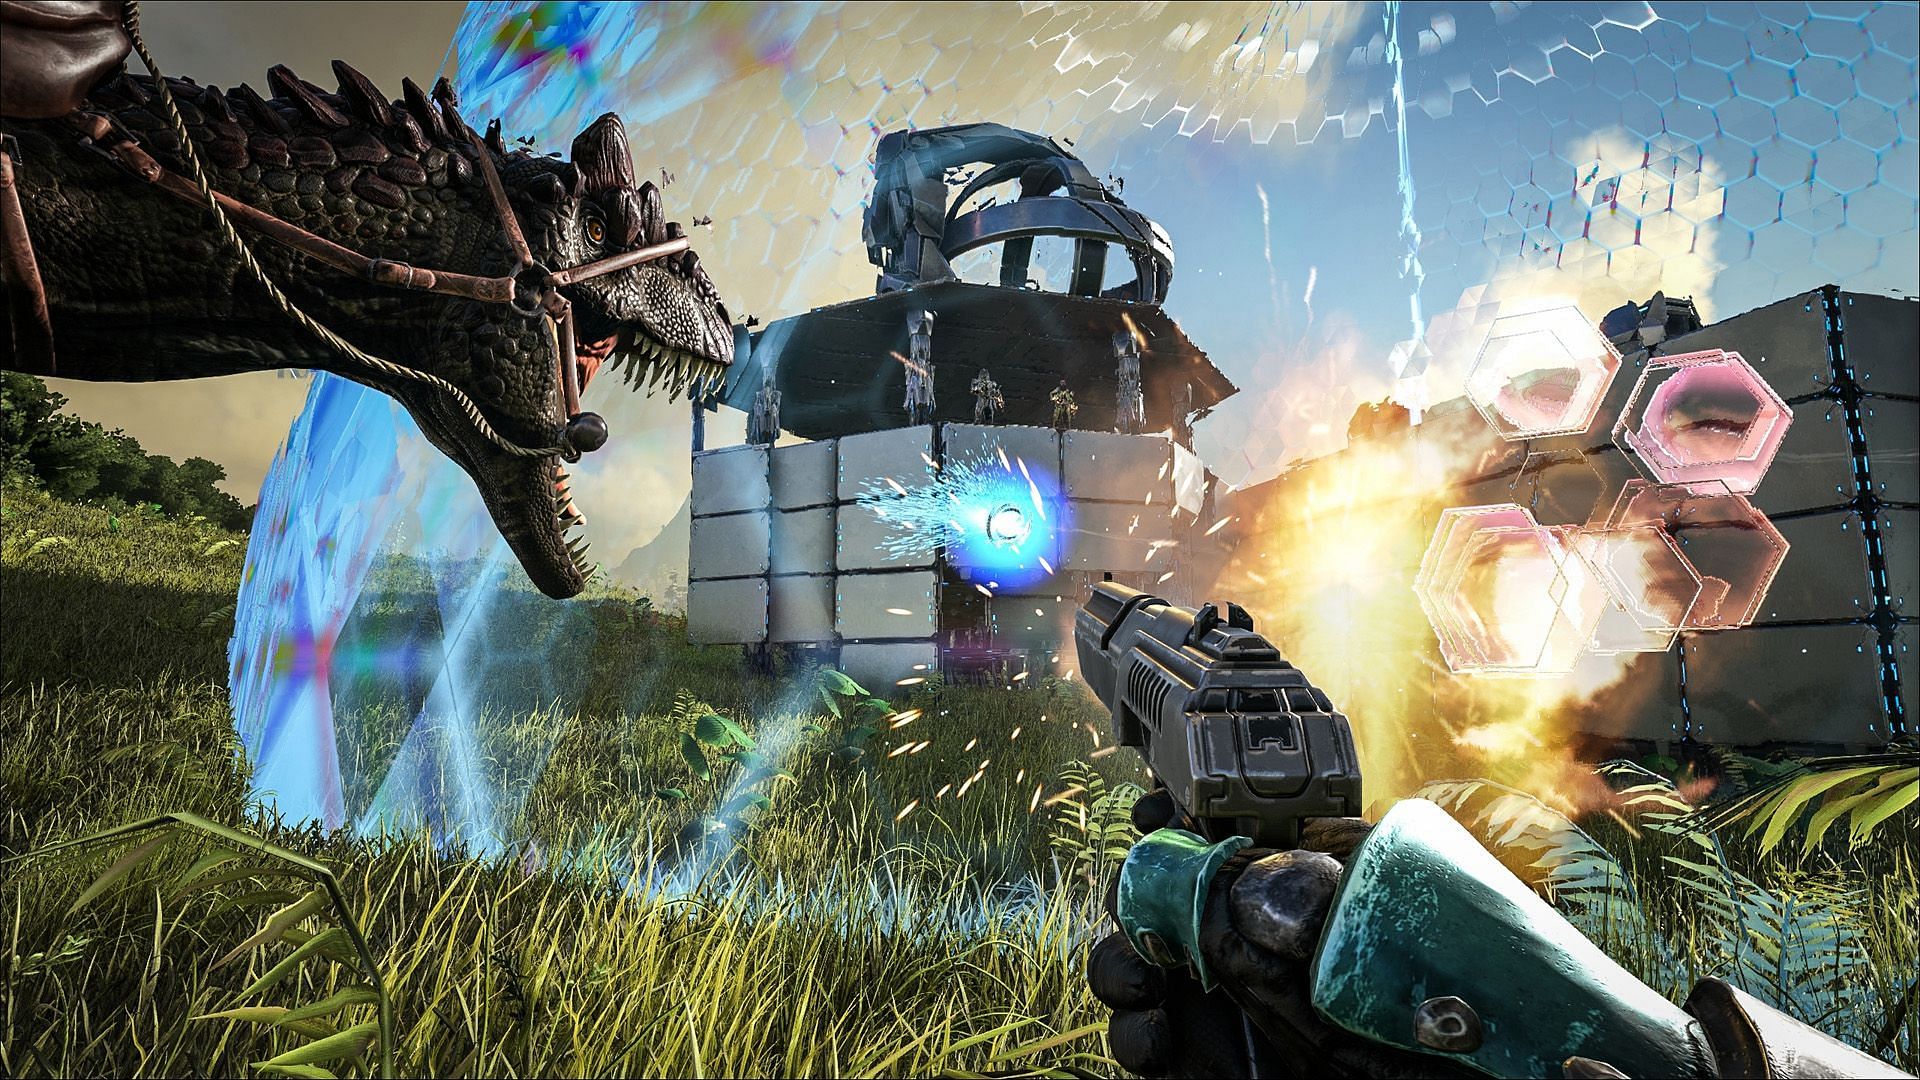 Ark Survival Evolved free on Epic Games Store: How to download